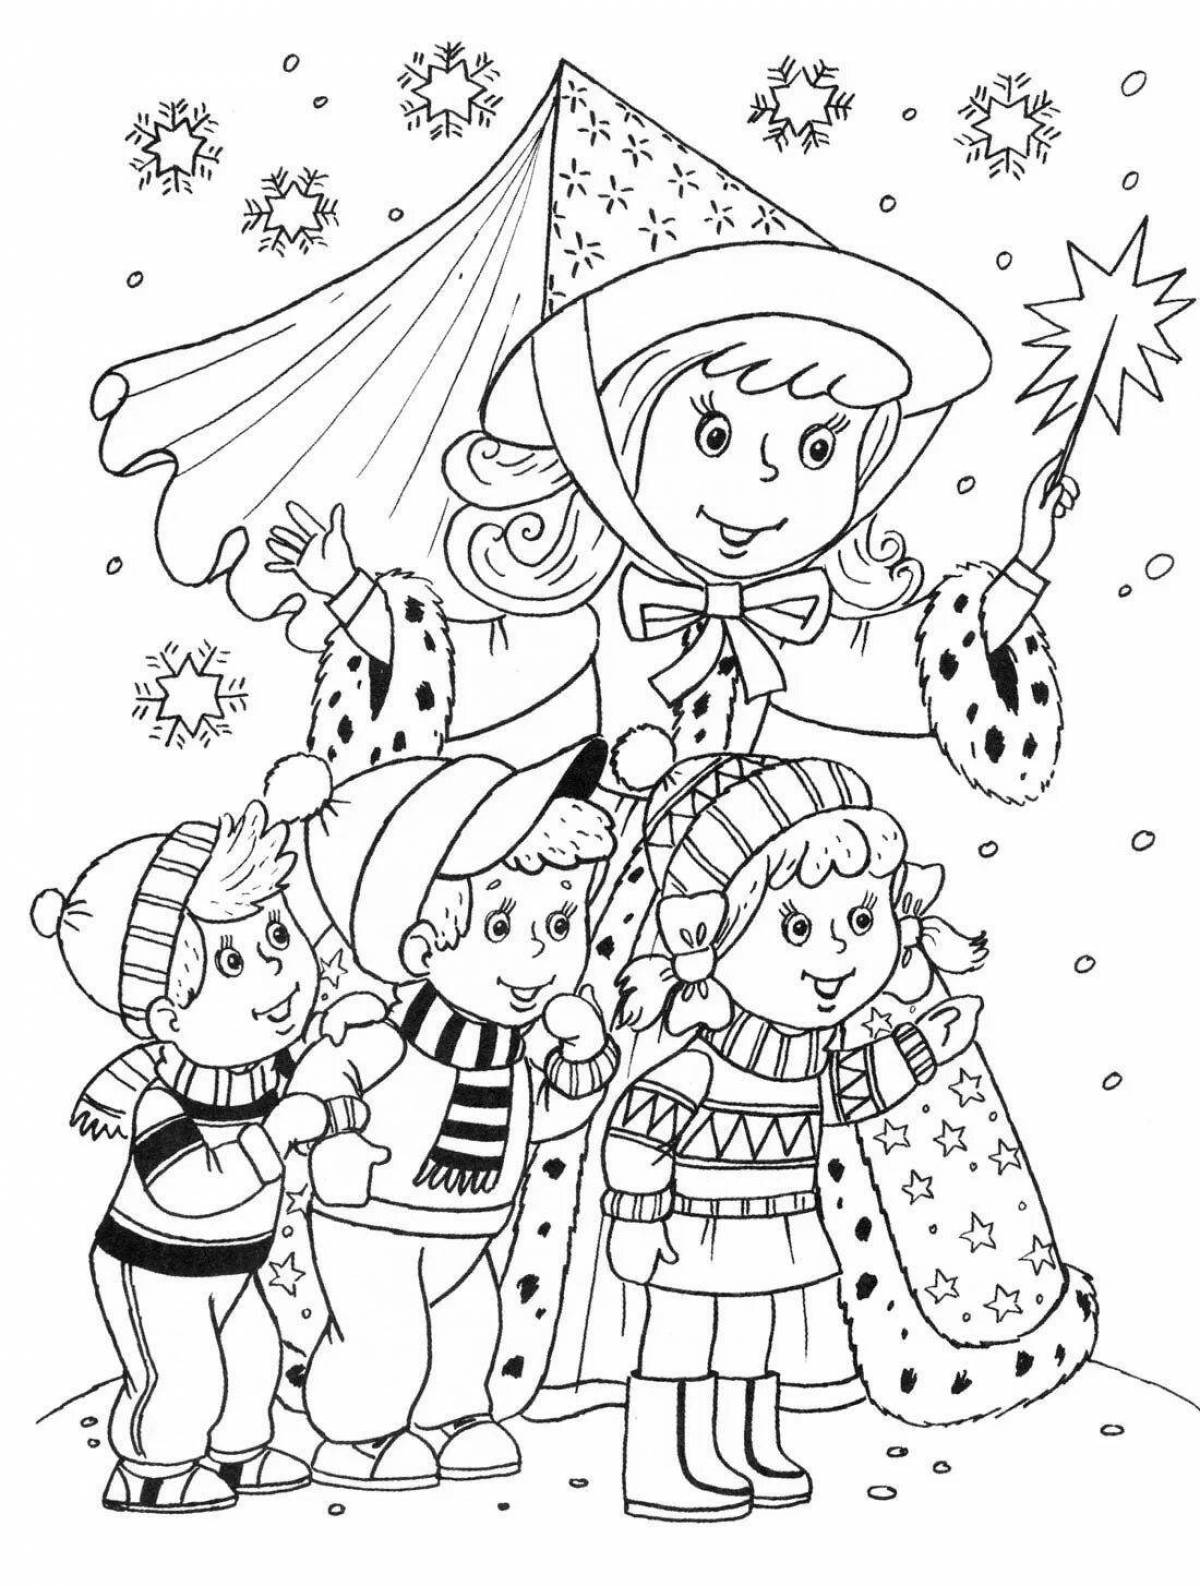 Exciting carol coloring pages for 4-5 year olds